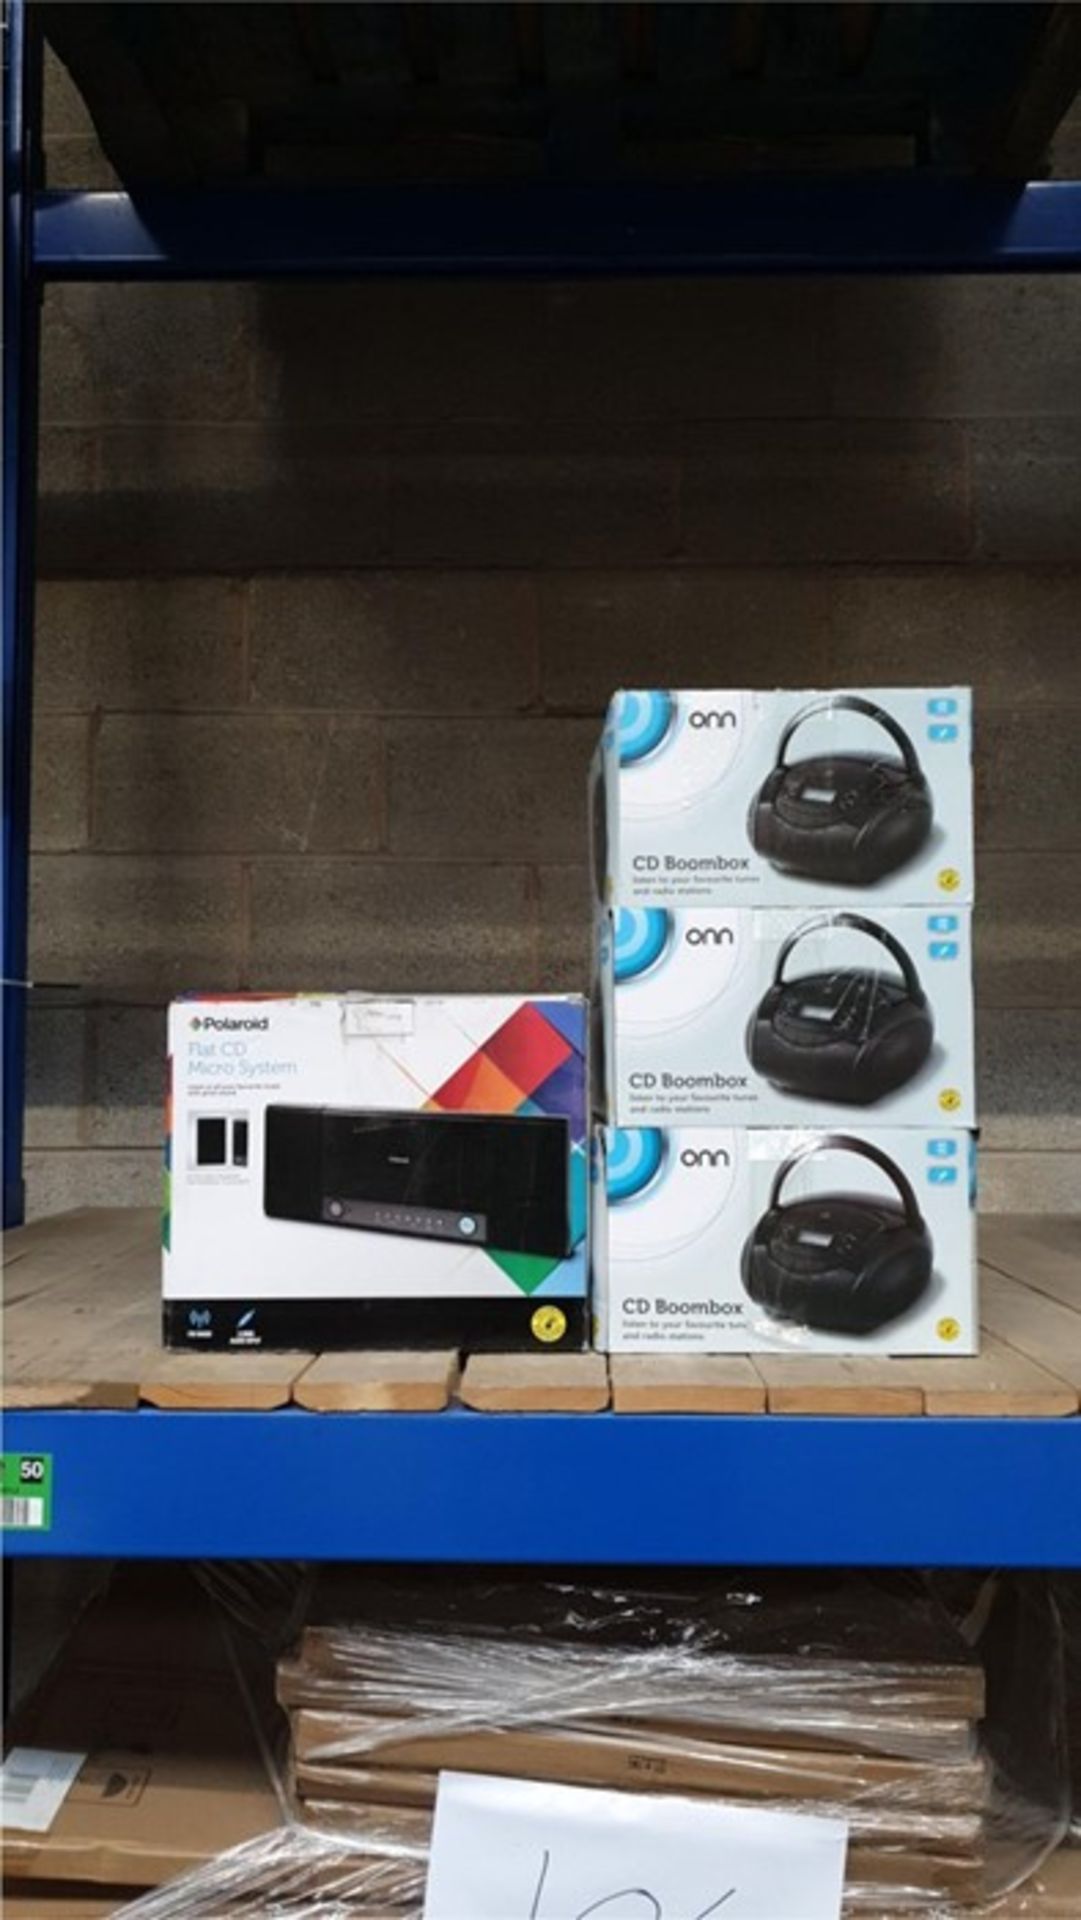 1 LOT TO CONTAIN 5 ASSORTED ELECTRICALS, INCLUDES ONN BOOMBOXES, FLAT CD PLAYERS / BL - 4578 (